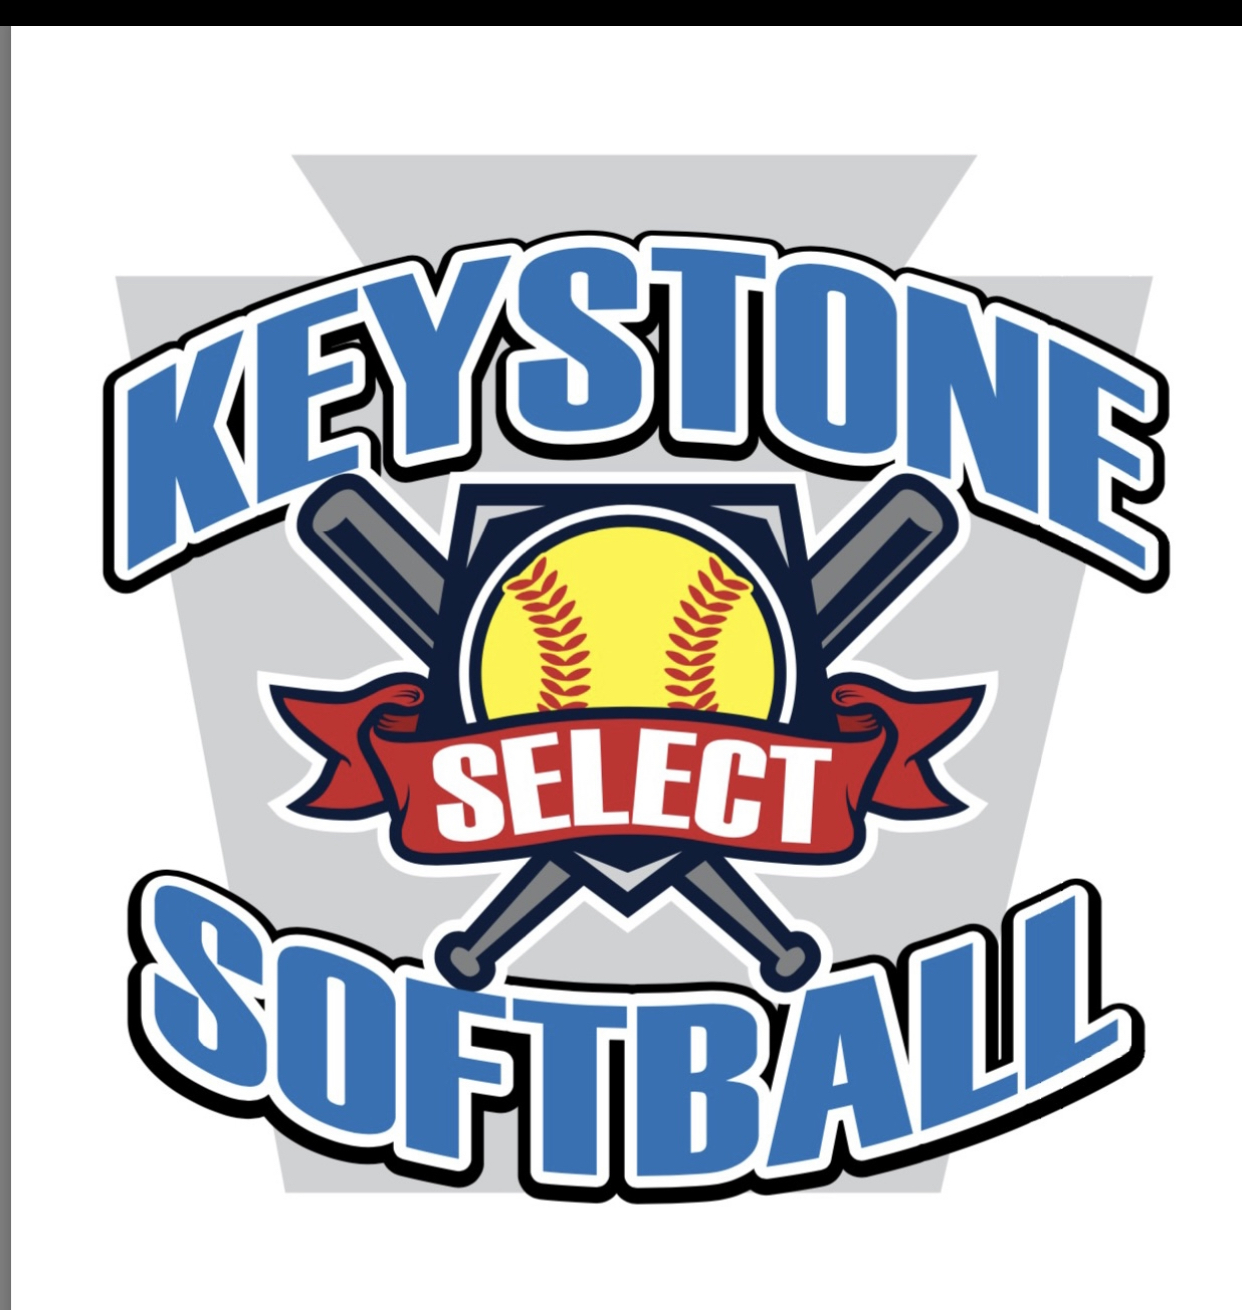 Keystone Select Softball Pink Out for Cancer Tournament Logo